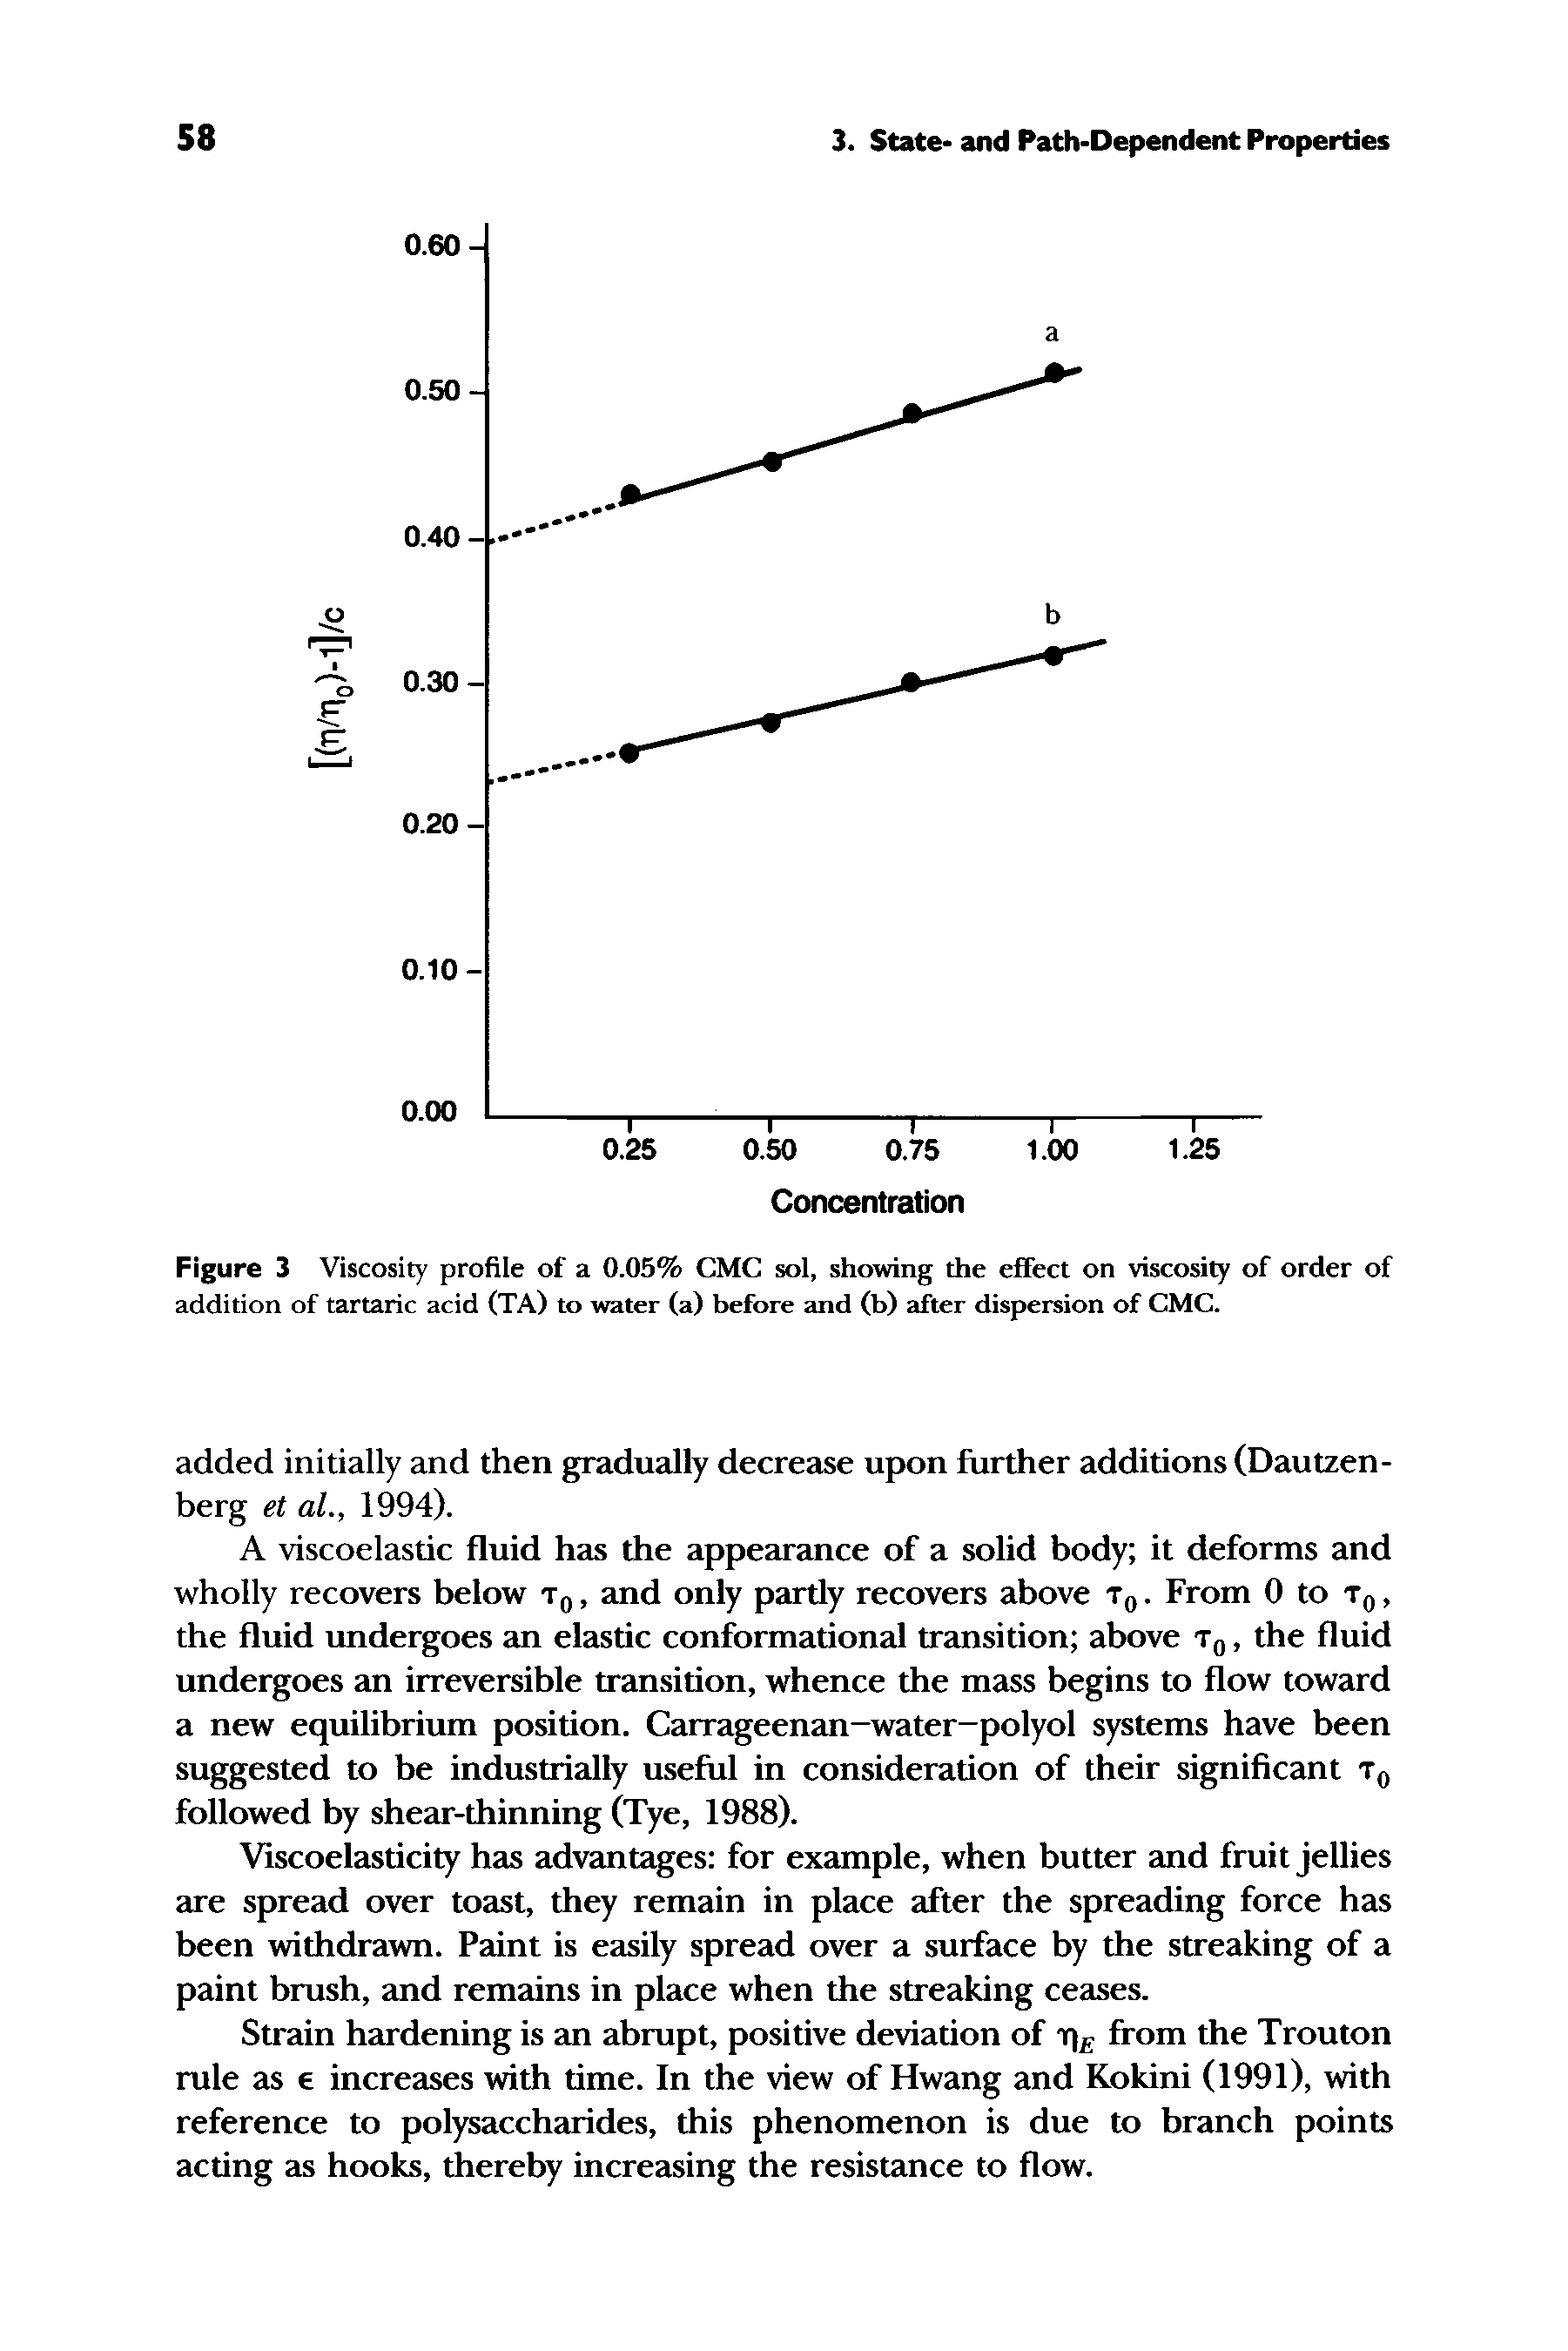 Figure 3 Viscosity profile of a 0.05% CMC sol, showing the effect on viscosity of order of addition of tartaric acid (TA) to water (a) before and (b) after dispersion of CMC.